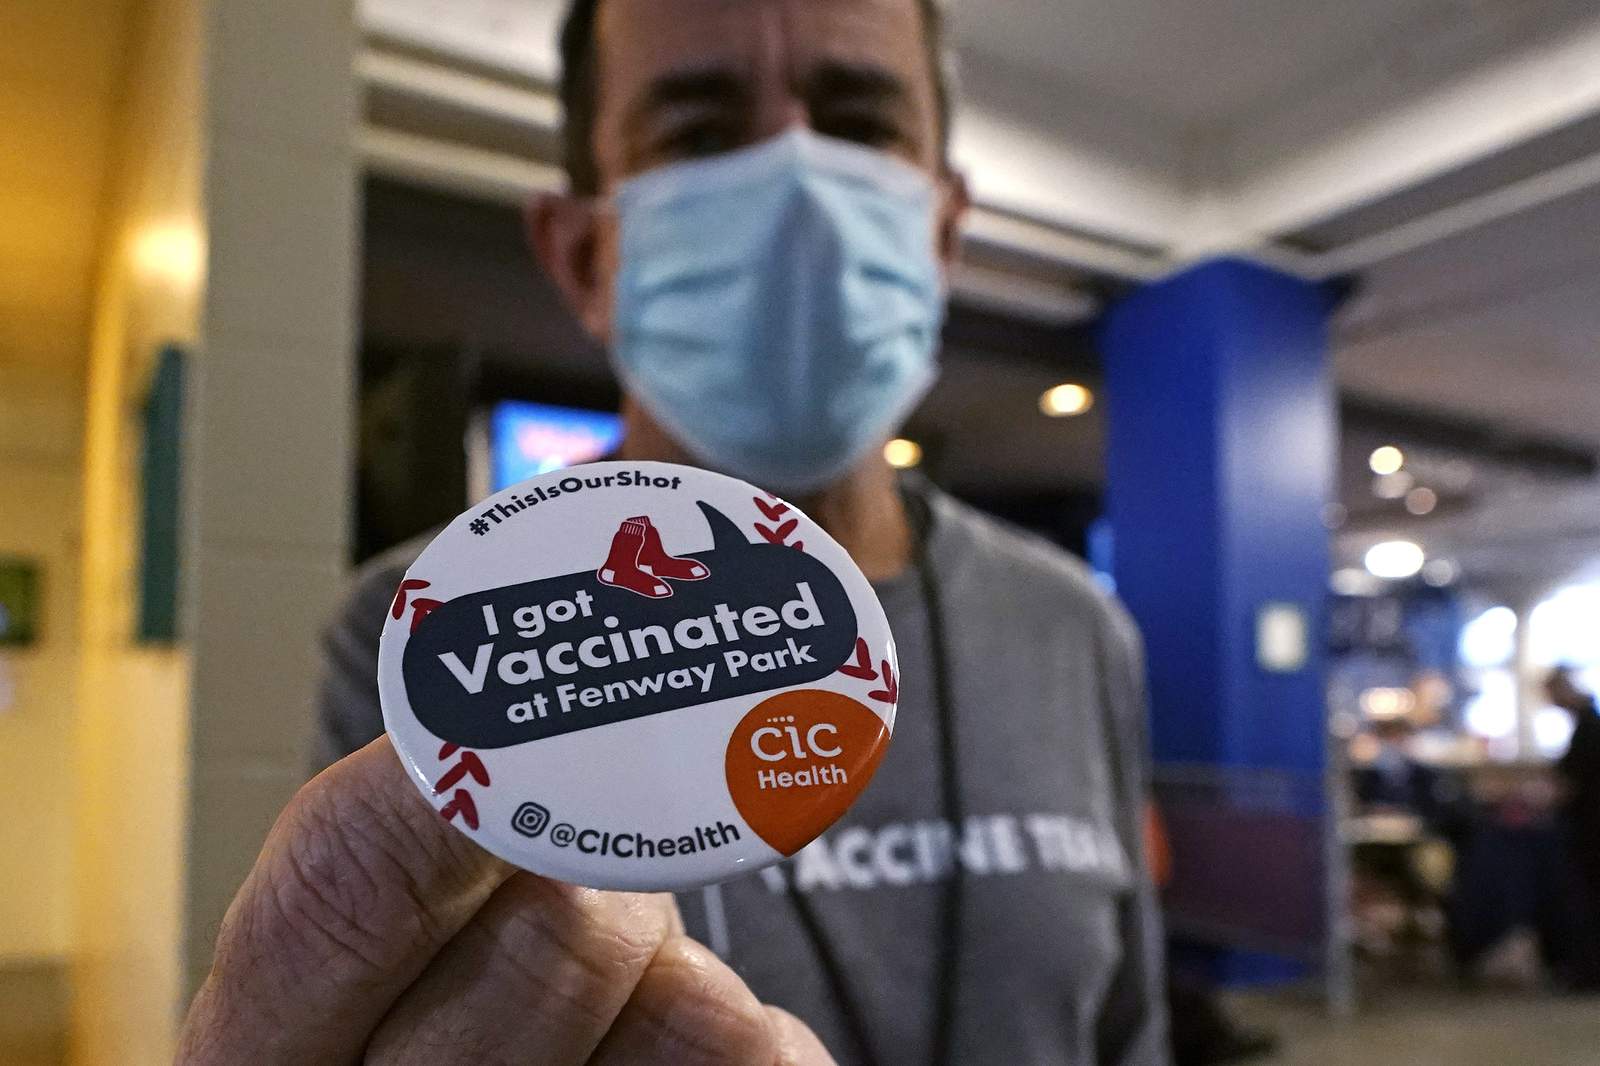 The Latest: Vaccinated congressman tests positive for virus